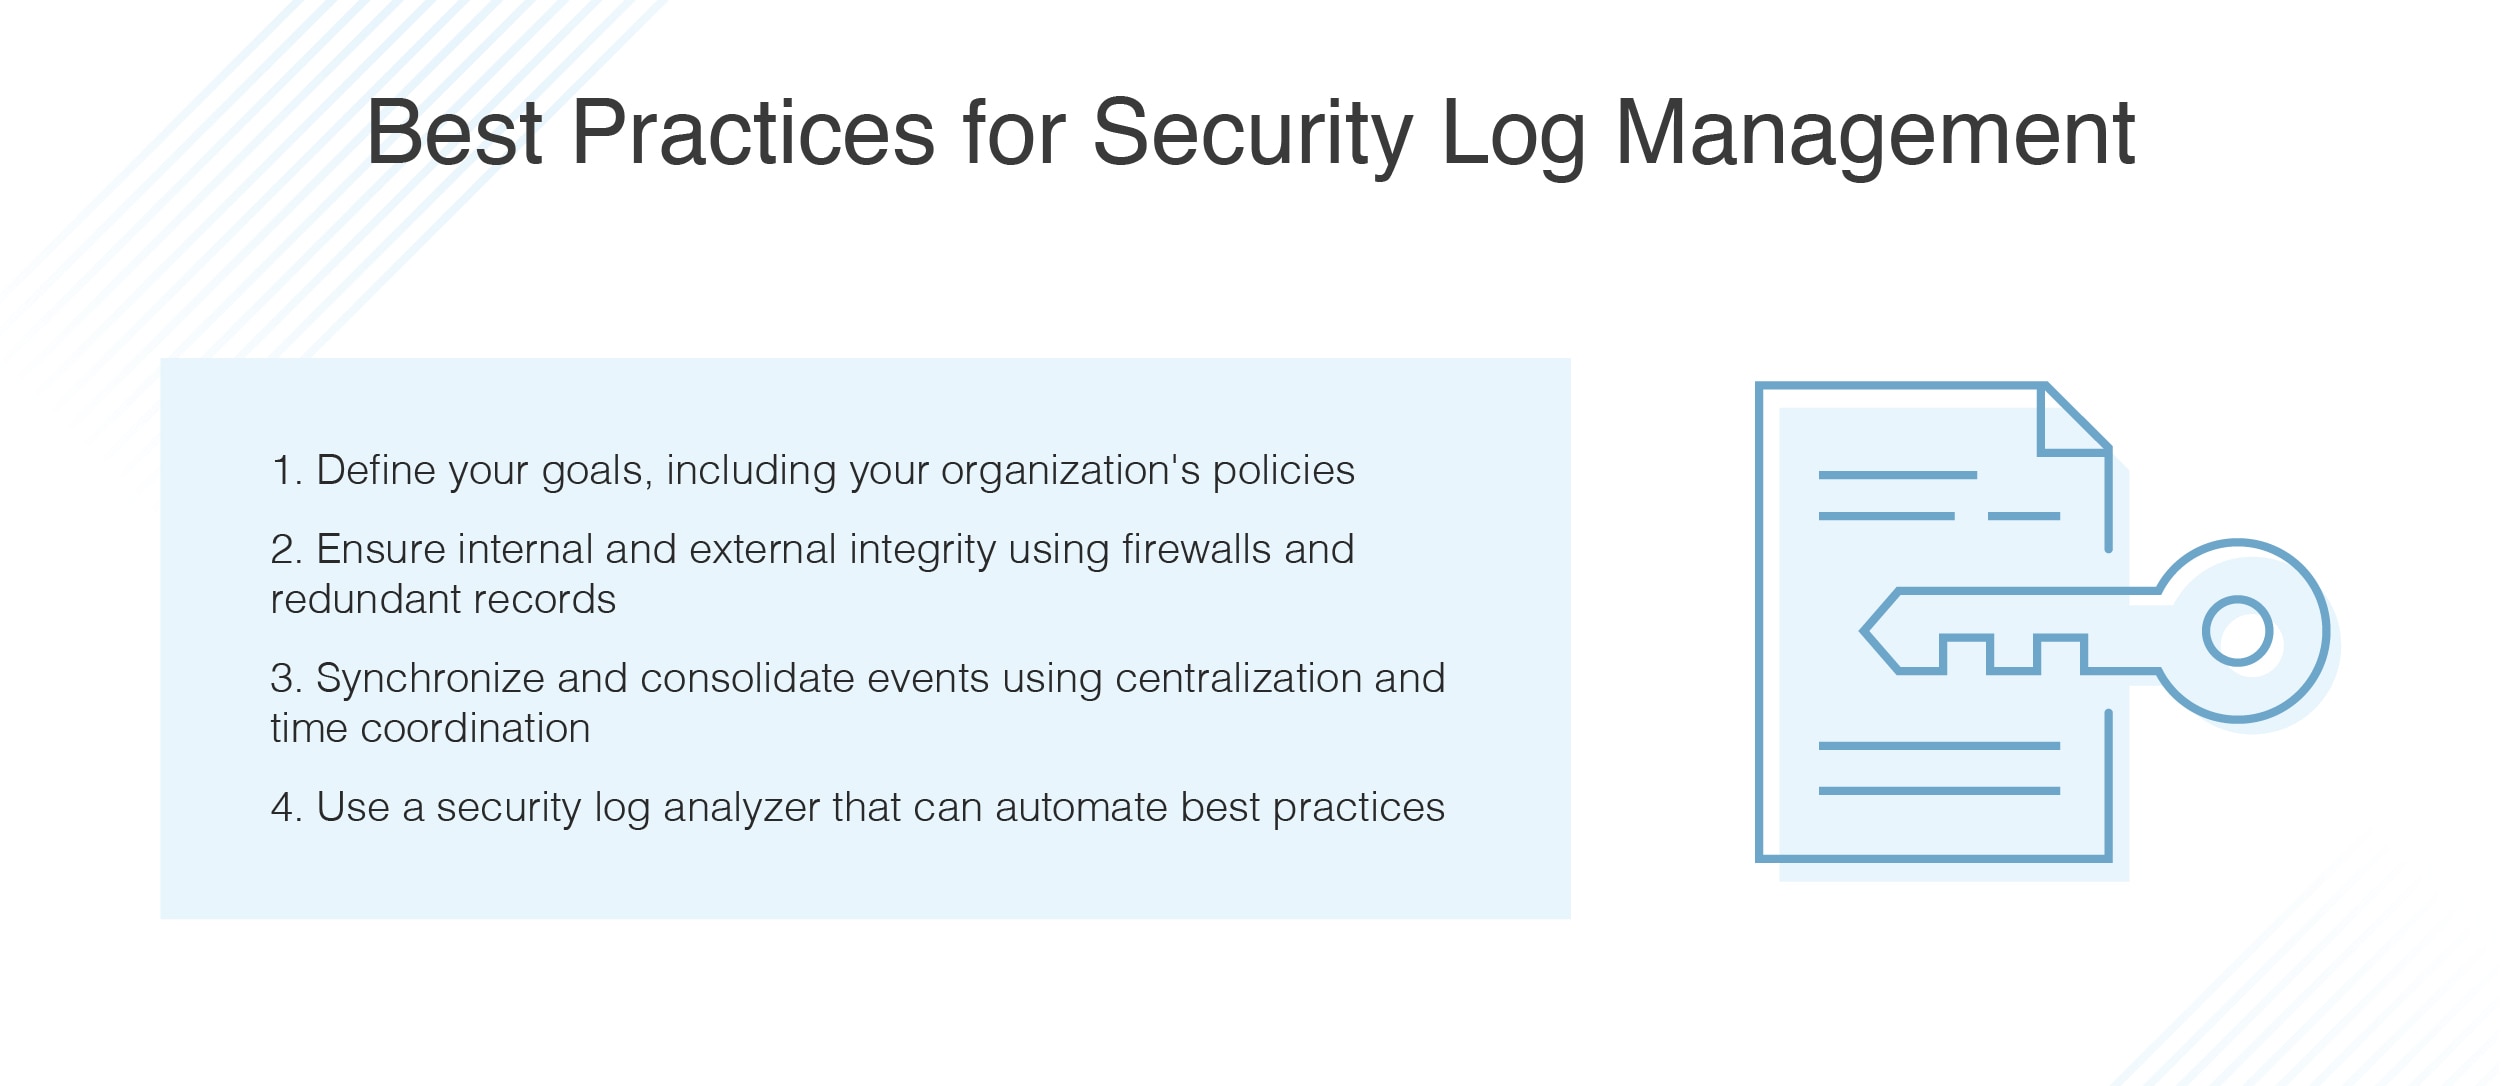 Best Practices for Security Log Management